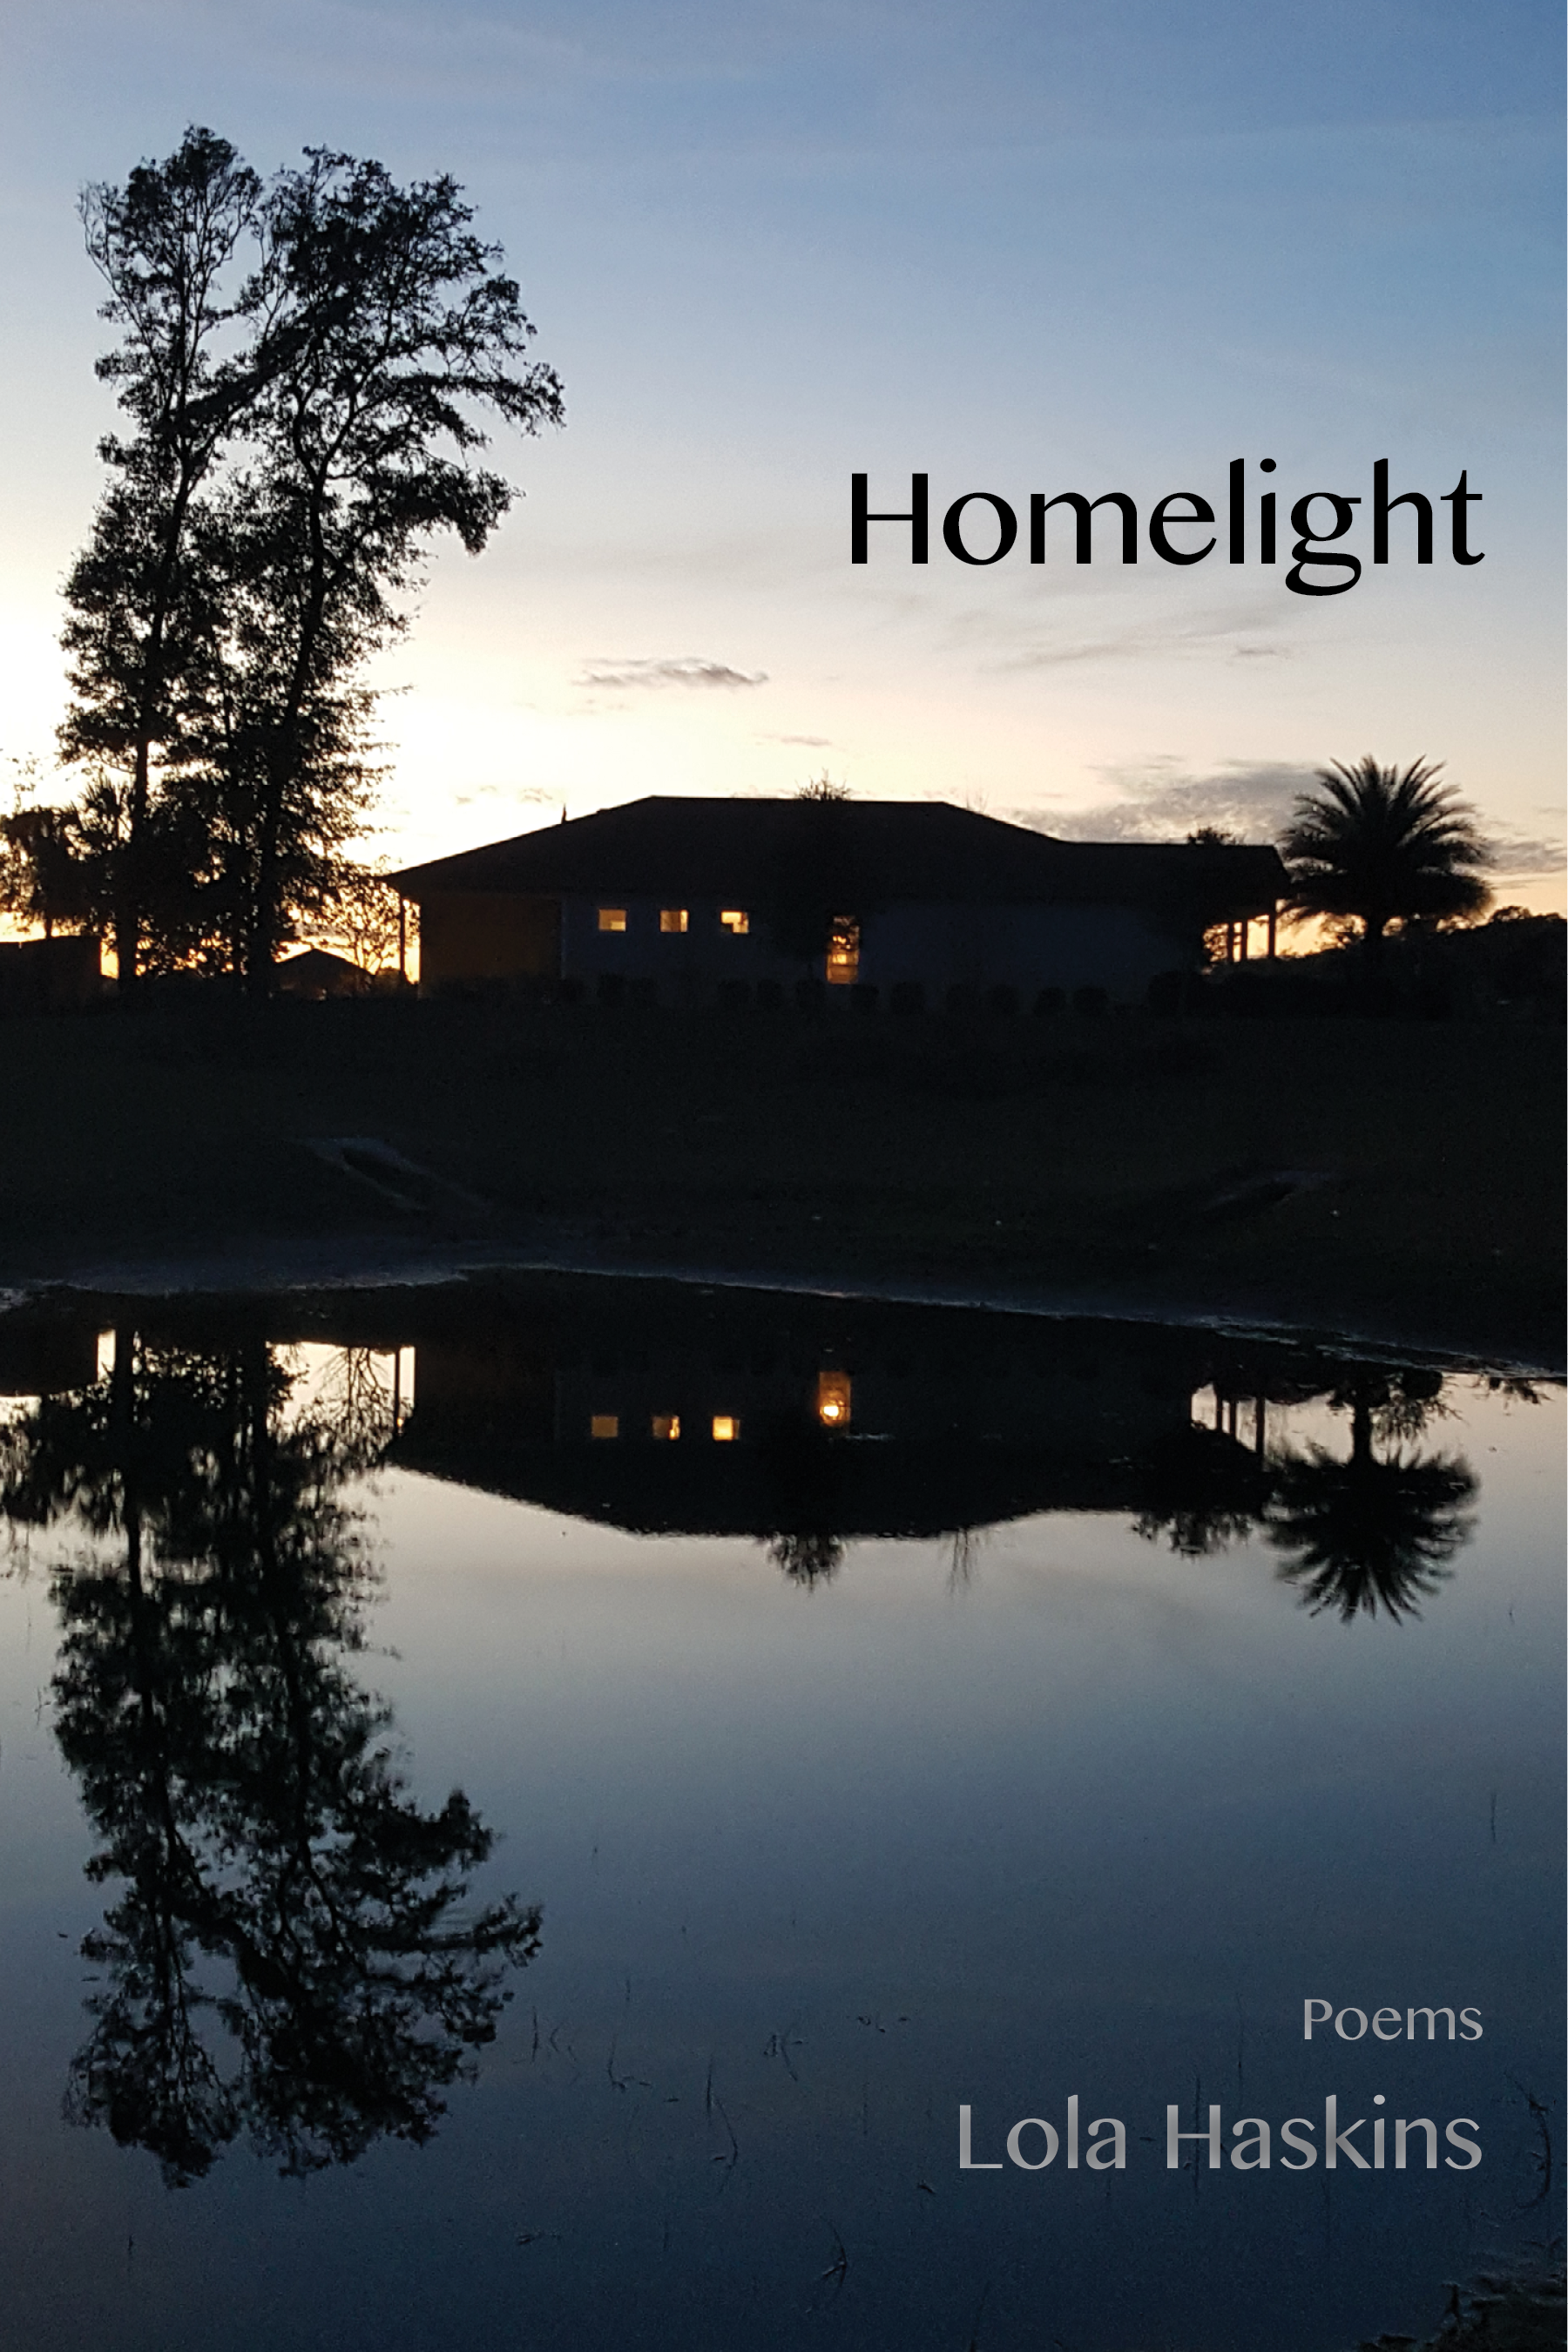 Homelight by Lola Haskins (front cover)